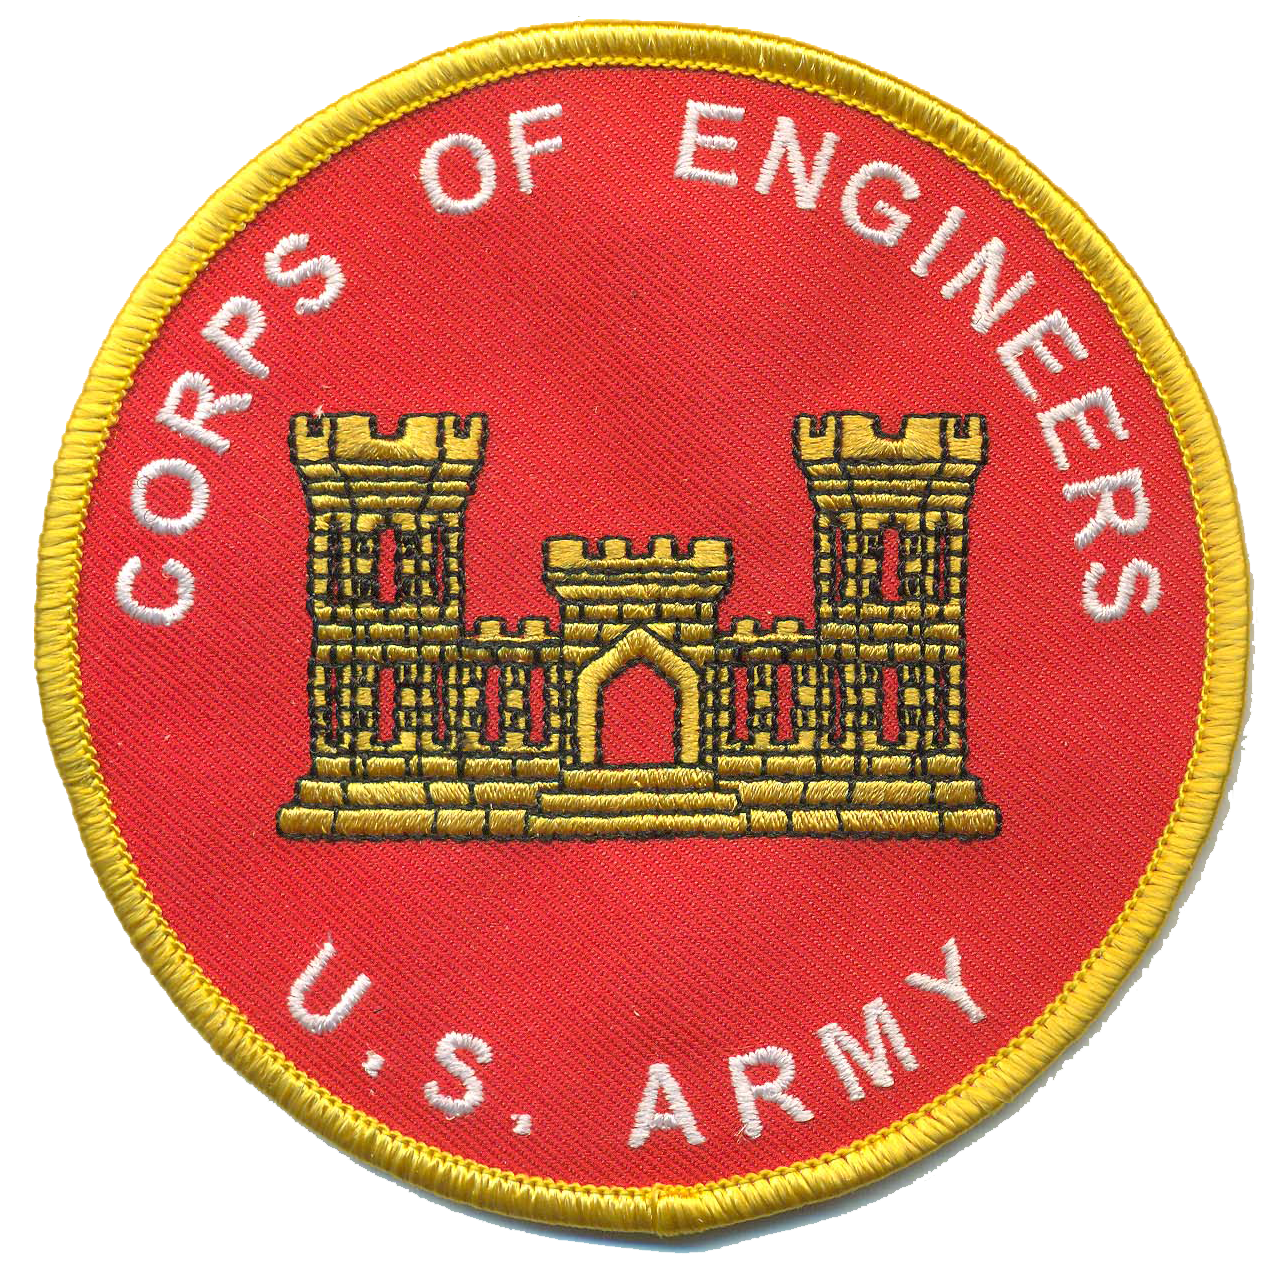 U.S. Army Corps of Engineers Novelty Patch